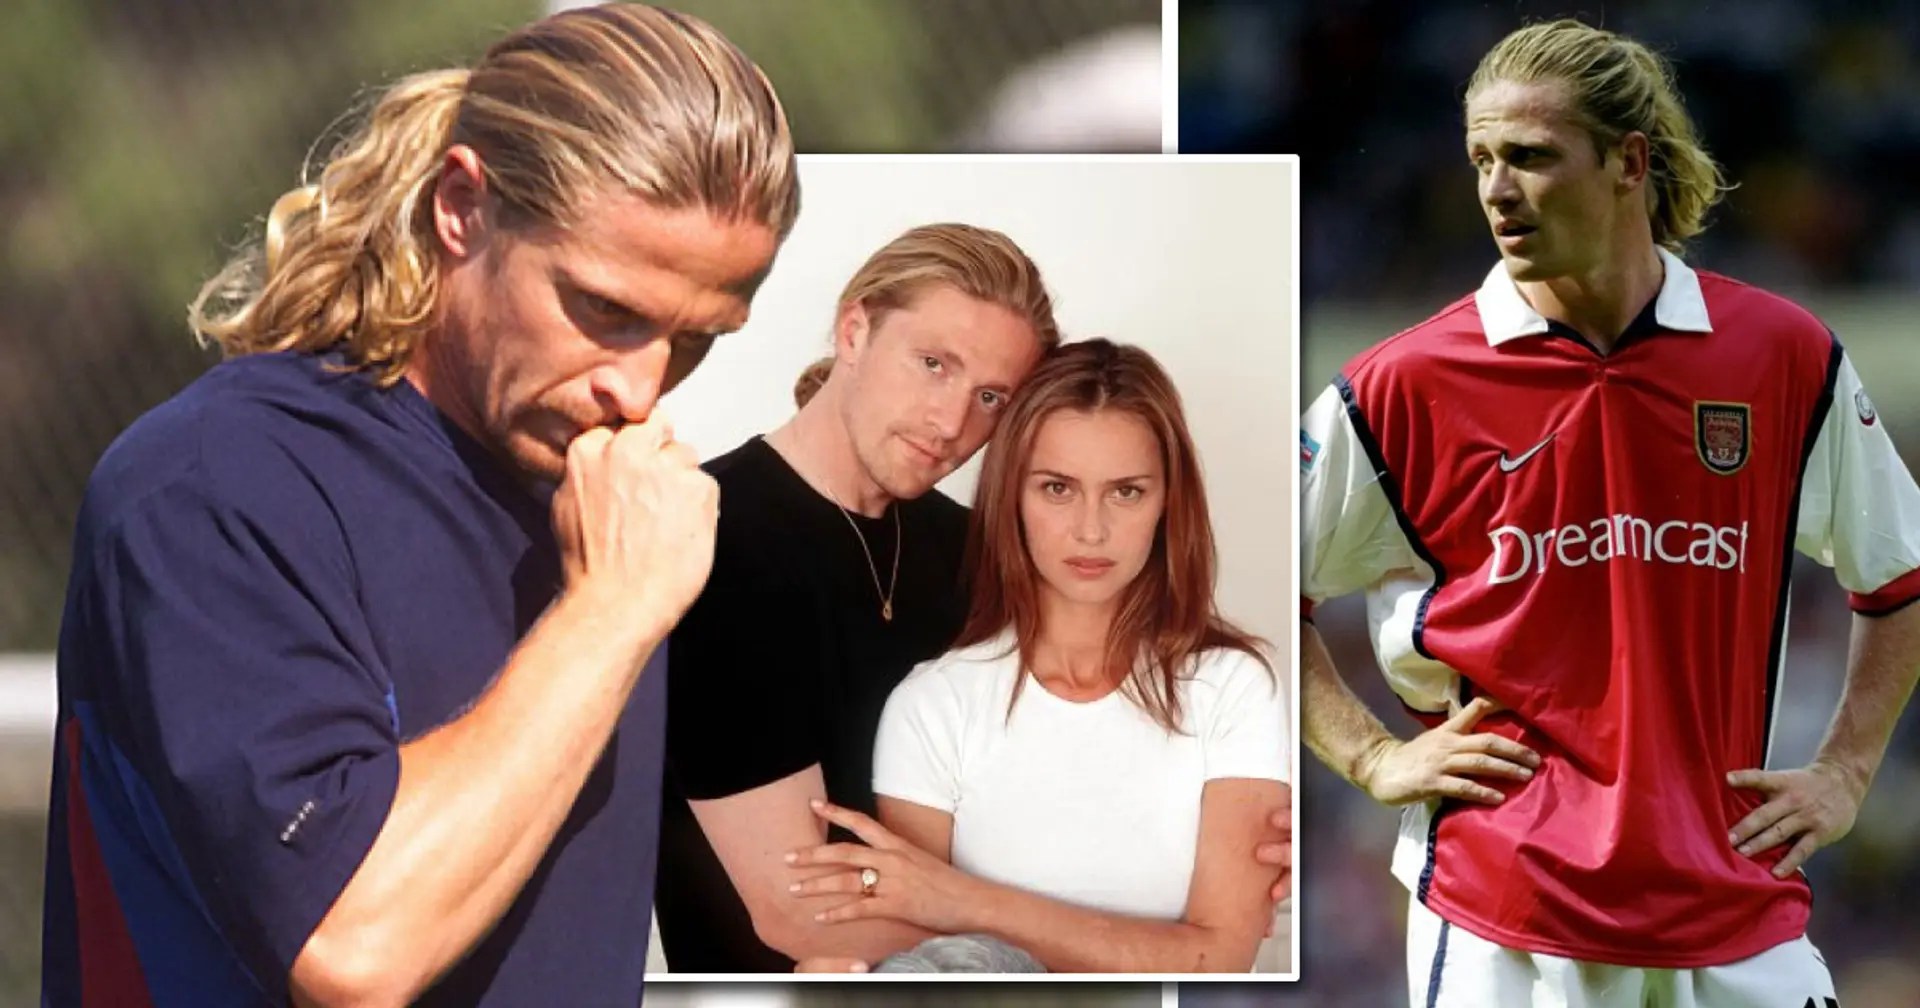 'My wife was tired of the rain': Emmanuel Petit left Arsenal because his wife didn't like the weather in London